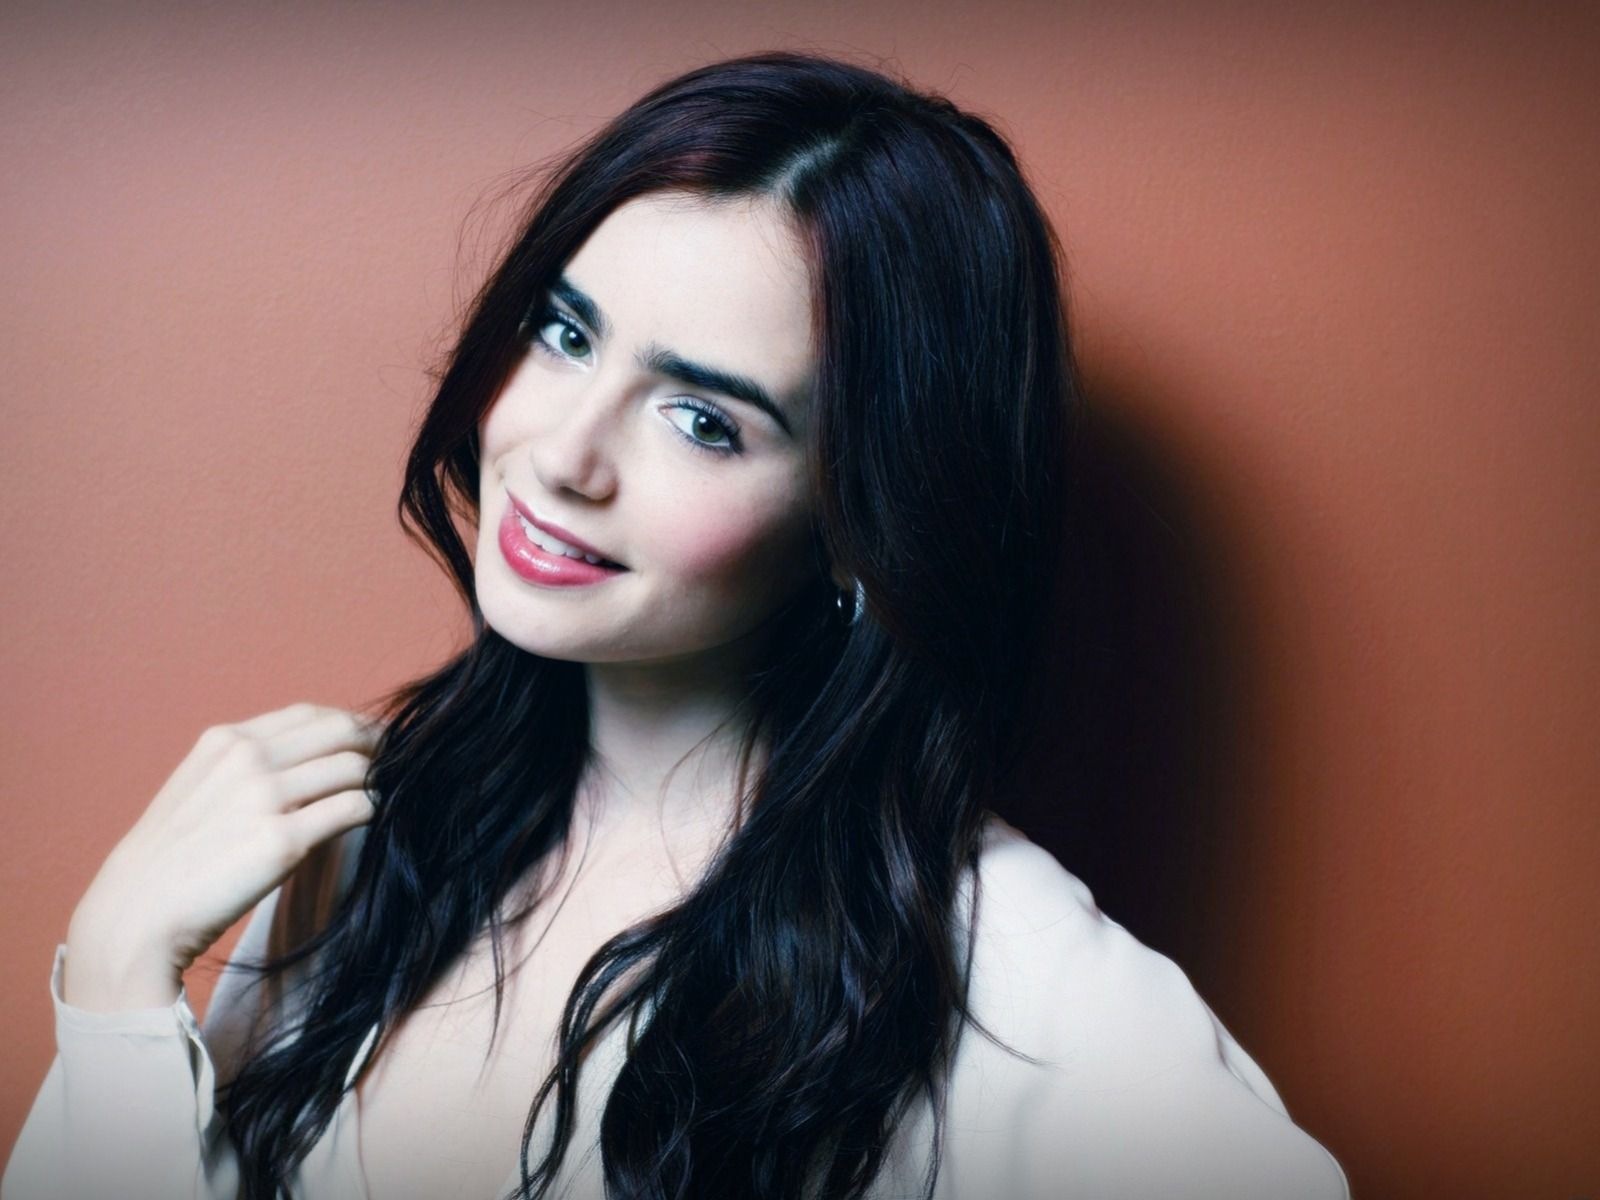 Lily Collins beautiful wallpapers #6 - 1600x1200